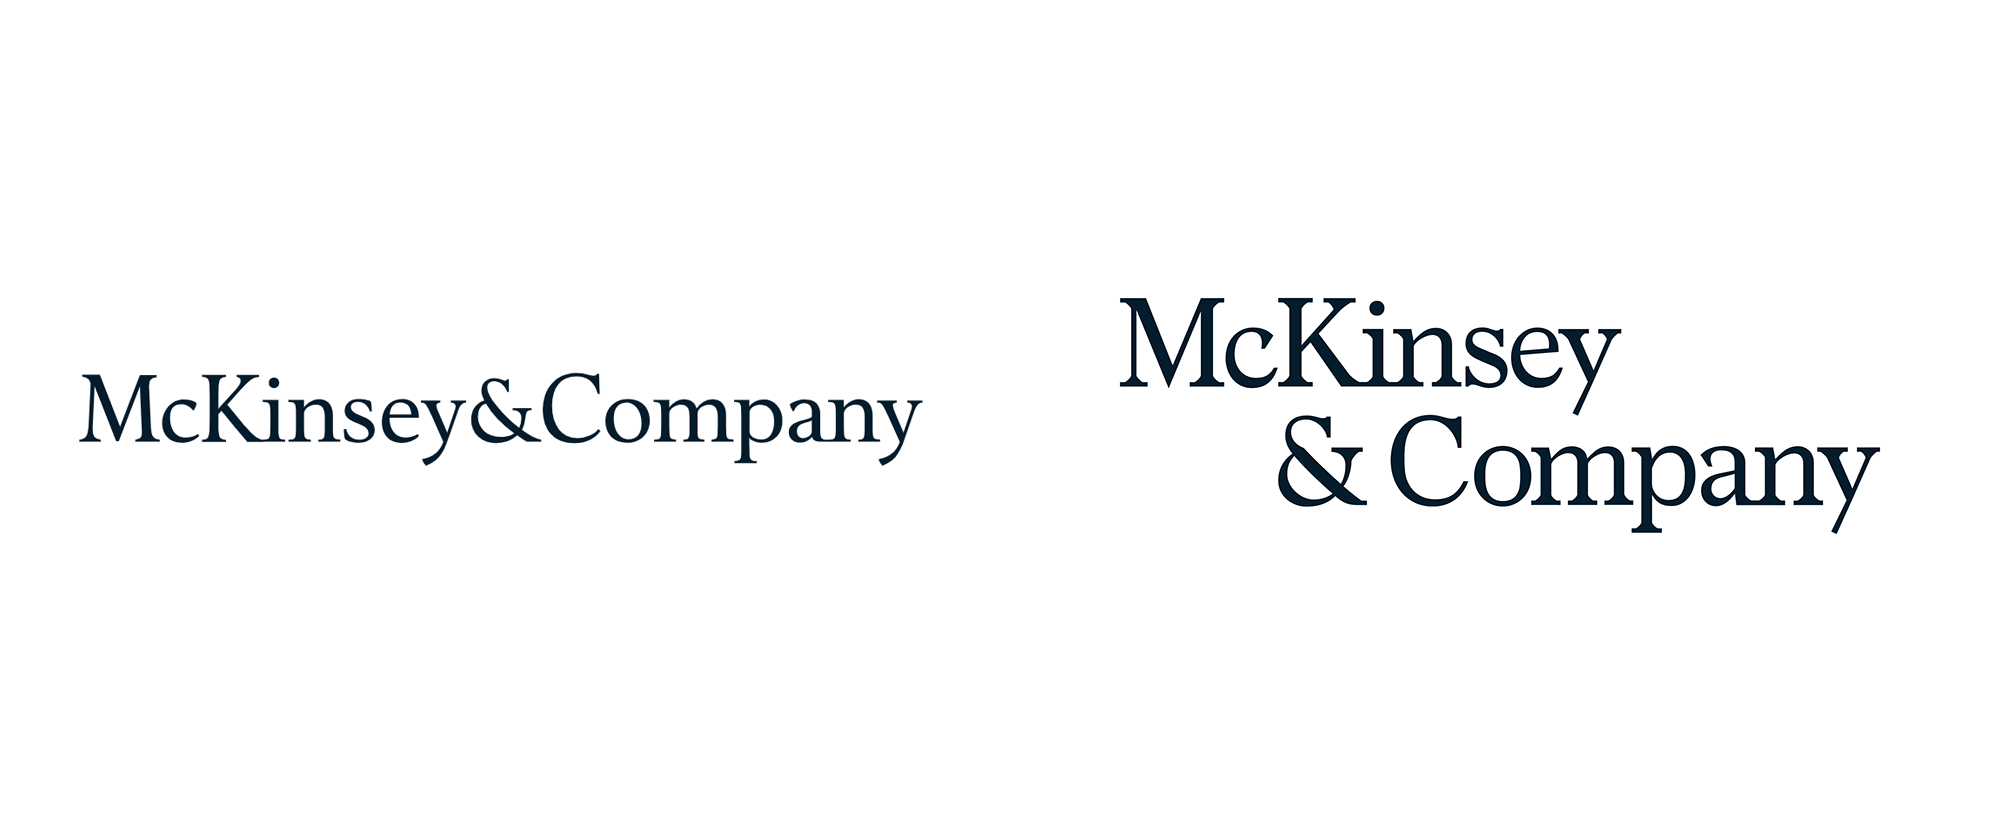 Brand New: New Logo and Identity for McKinsey by Wolff Olins